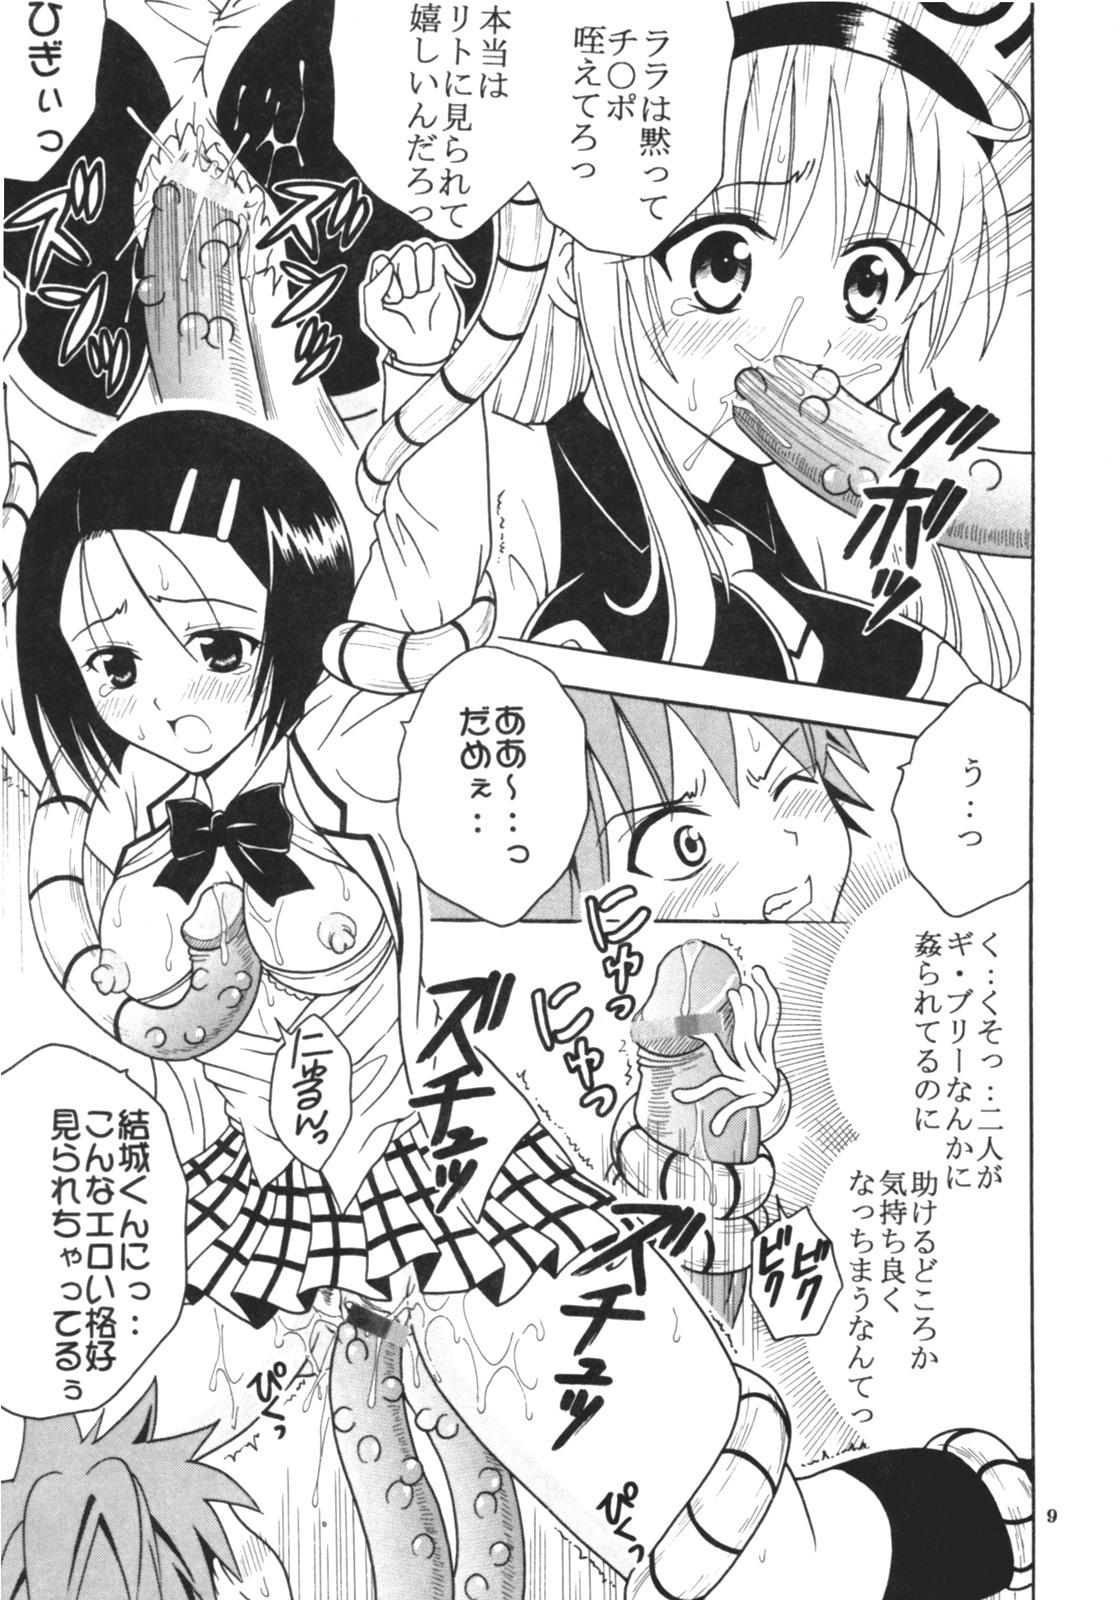 Massages ToLOVE Ryu 3 - To love ru Hidden - Page 10